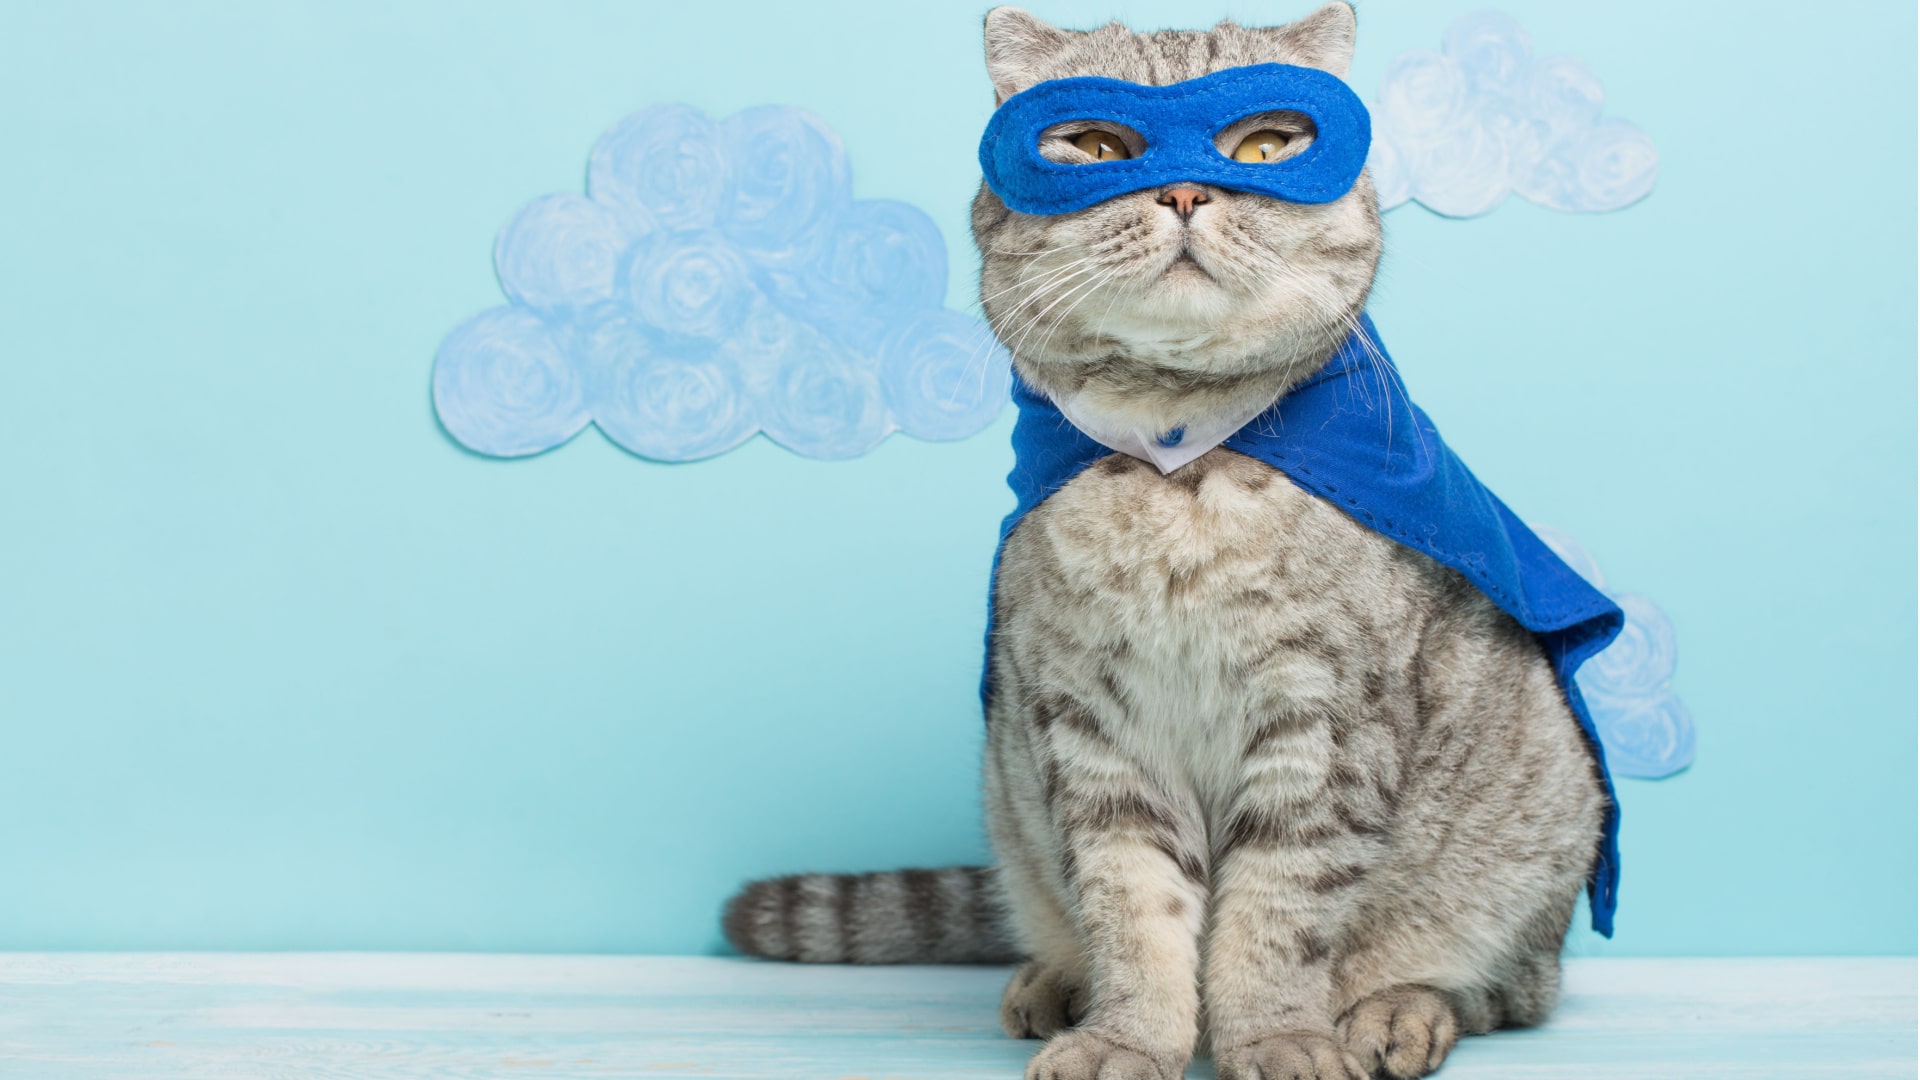 superhero cat with a blue cloak and mask.